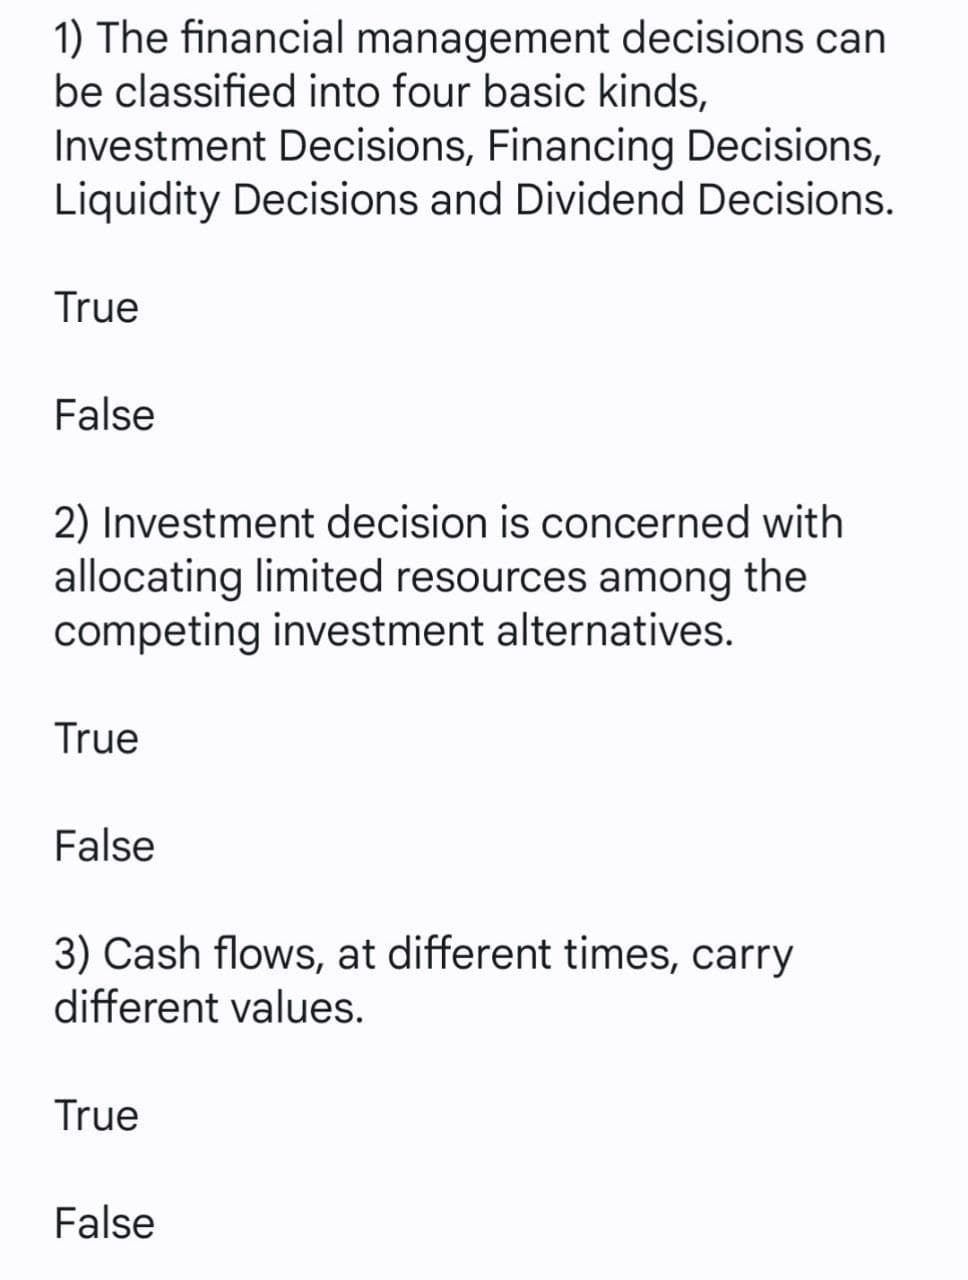 1) The financial management decisions can
be classified into four basic kinds,
Investment Decisions, Financing Decisions,
Liquidity Decisions and Dividend Decisions.
True
False
2) Investment decision is concerned with
allocating limited resources among the
competing investment alternatives.
True
False
3) Cash flows, at different times, carry
different values.
True
False
